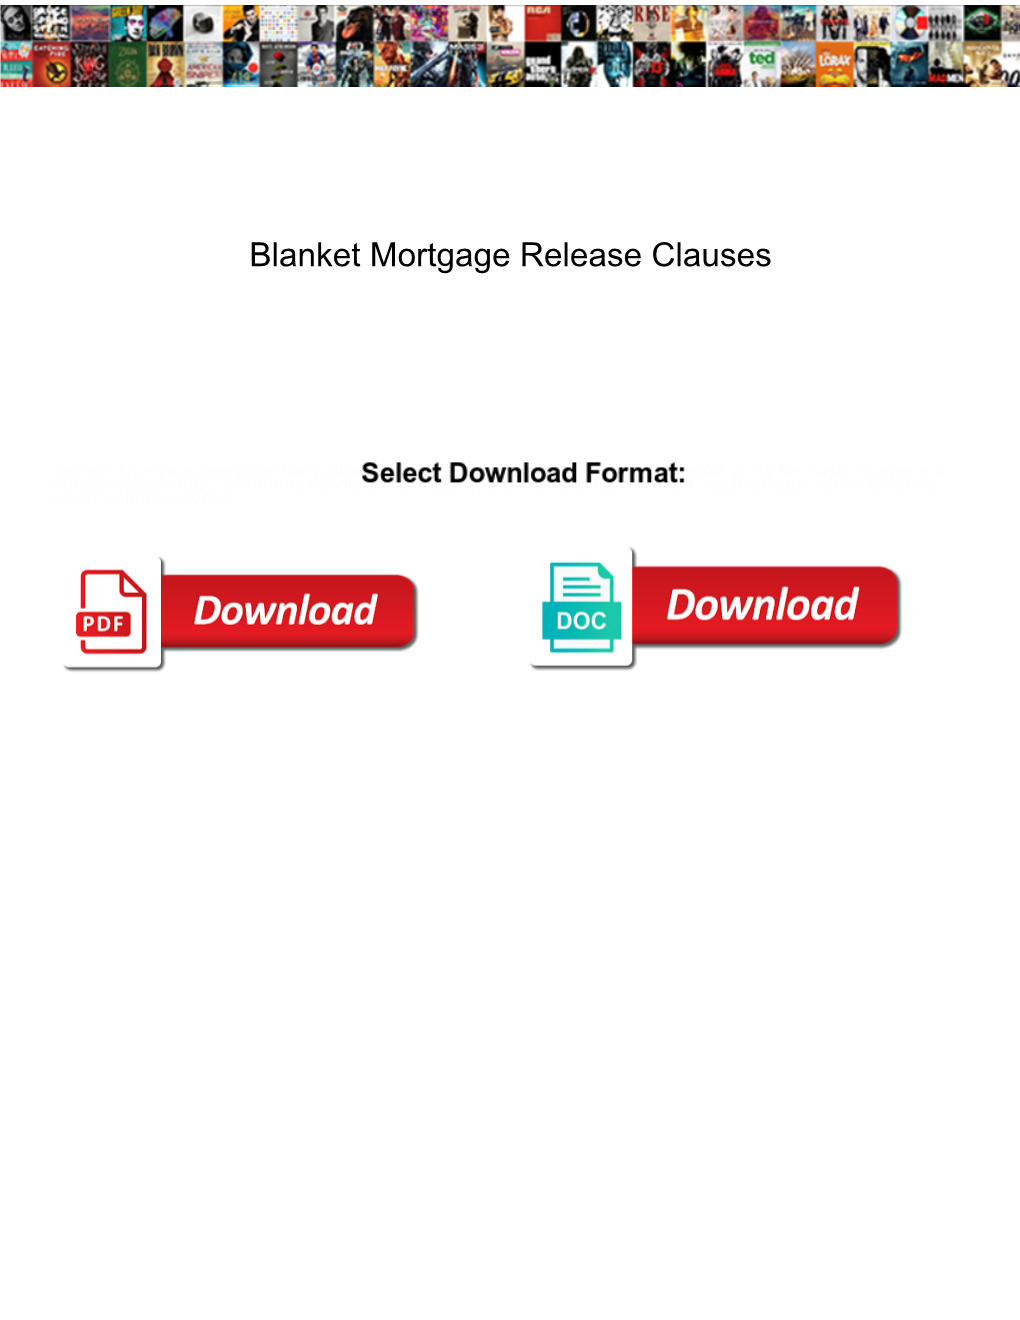 Blanket Mortgage Release Clauses